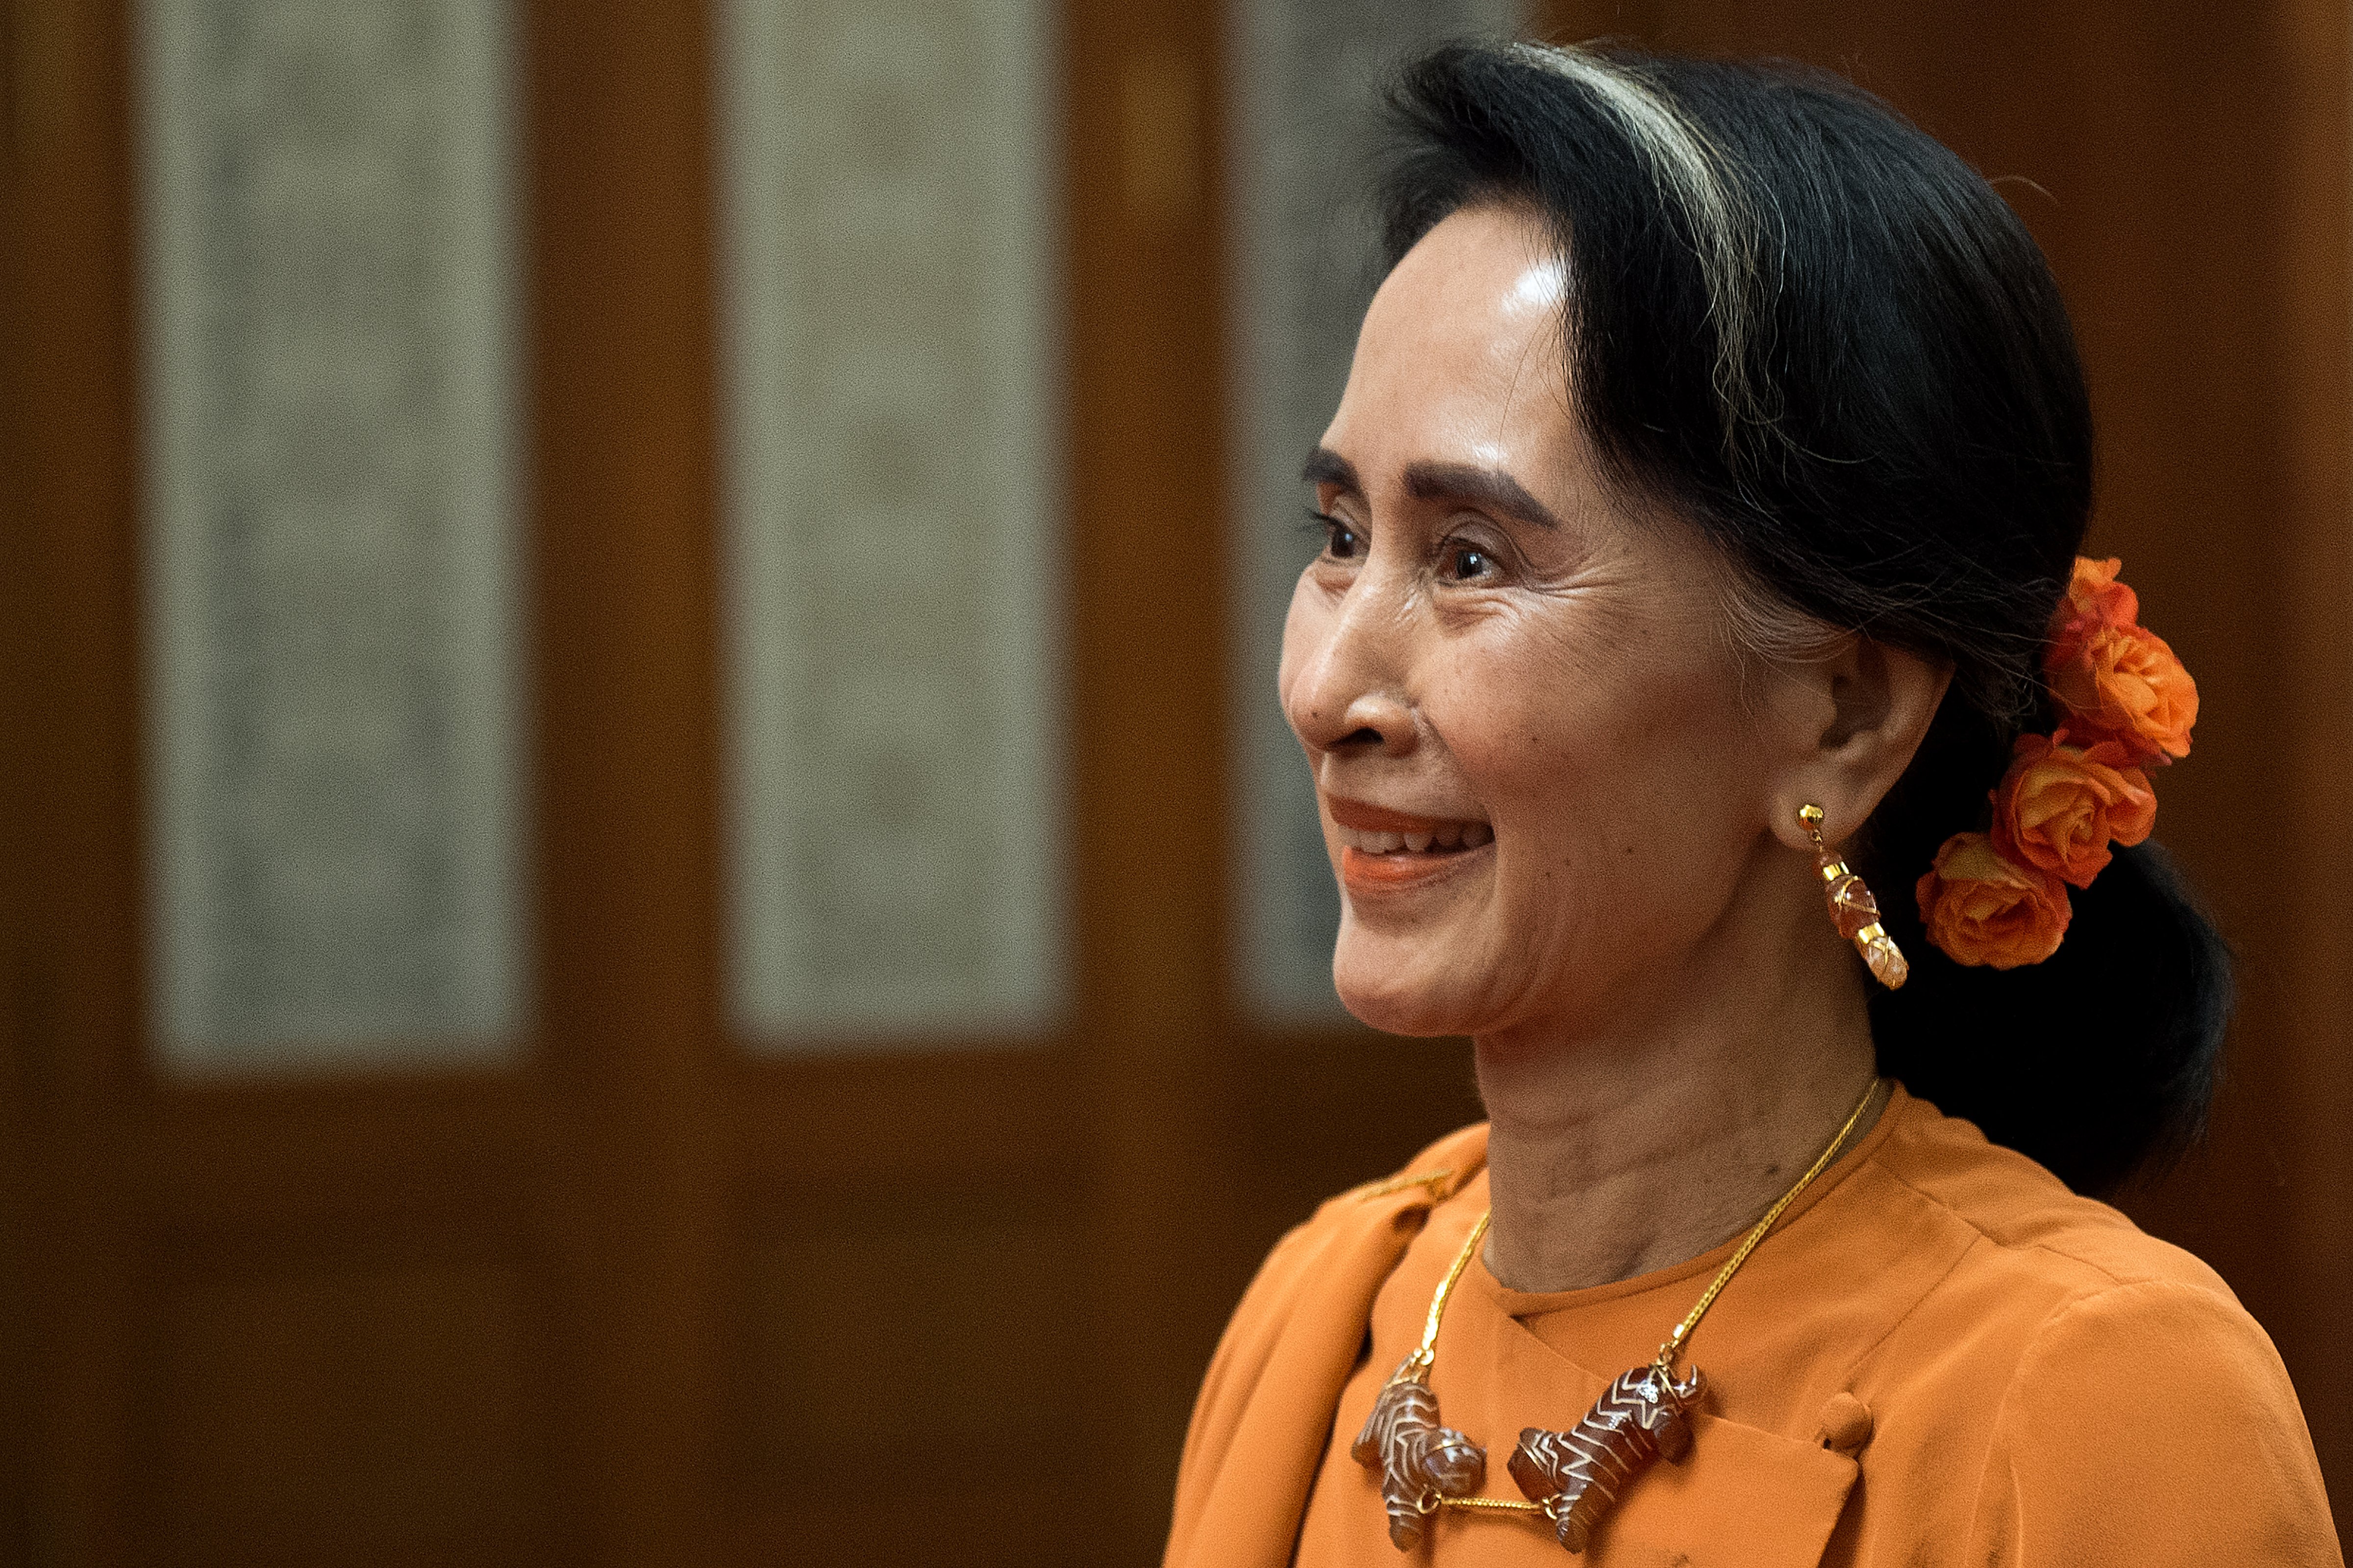 Myanmar State Counsellor Aung San Suu Kyi smiles at the Great Hall of the People on May 16, 2017 in Beijing, China. (Nicolas Asfouri—Getty Images)